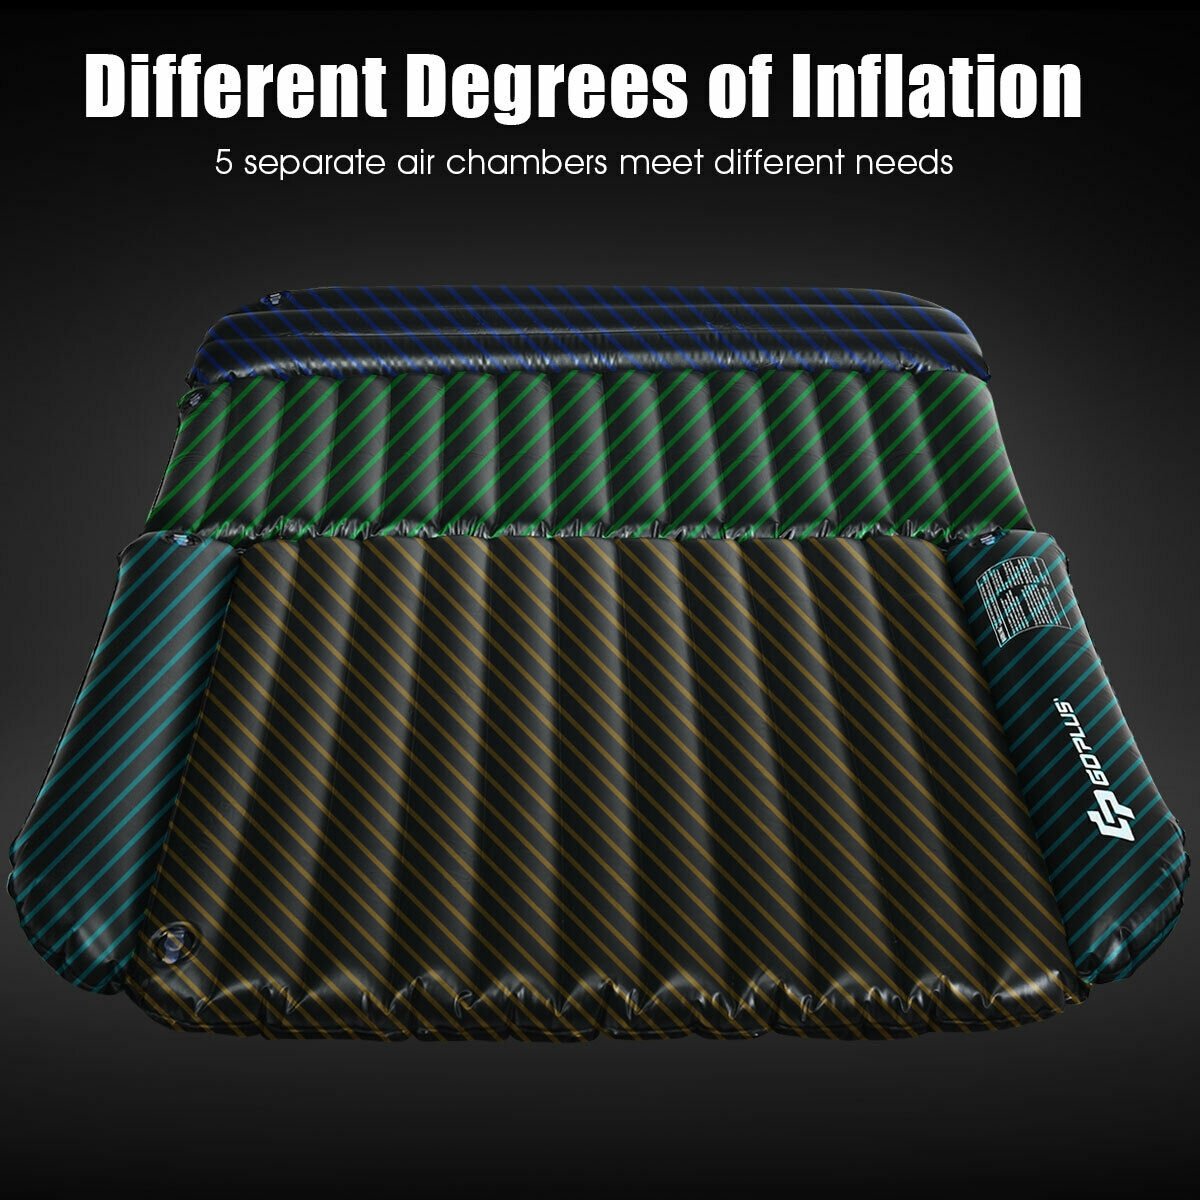 Inflatable SUV Air Backseat Mattress Travel Pad with Pump Outdoor